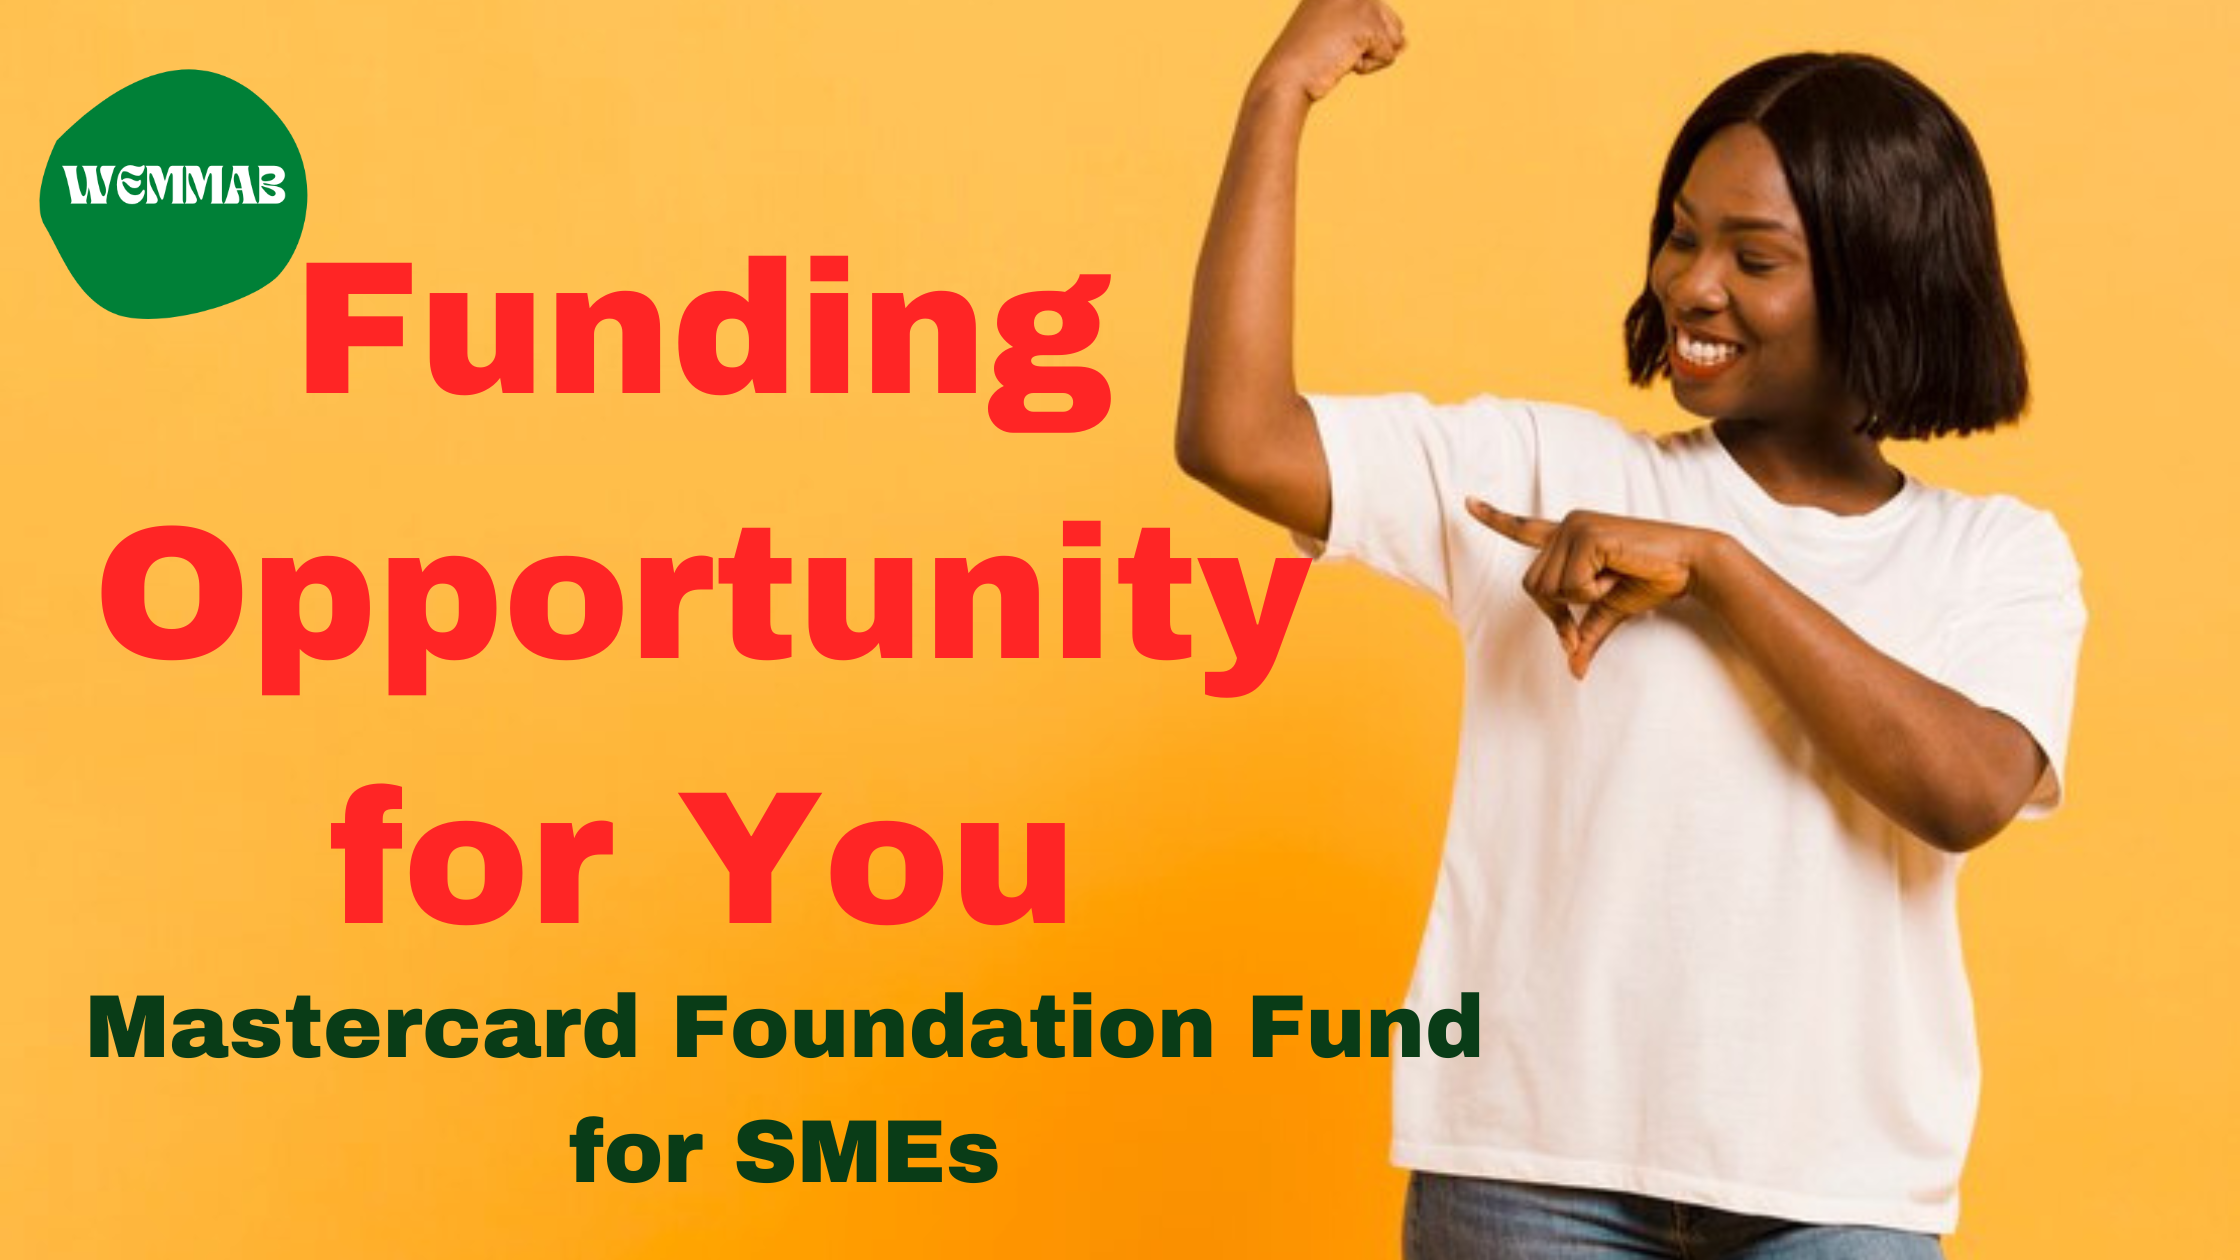 Funding opportunity for you: $126 million for SMEs